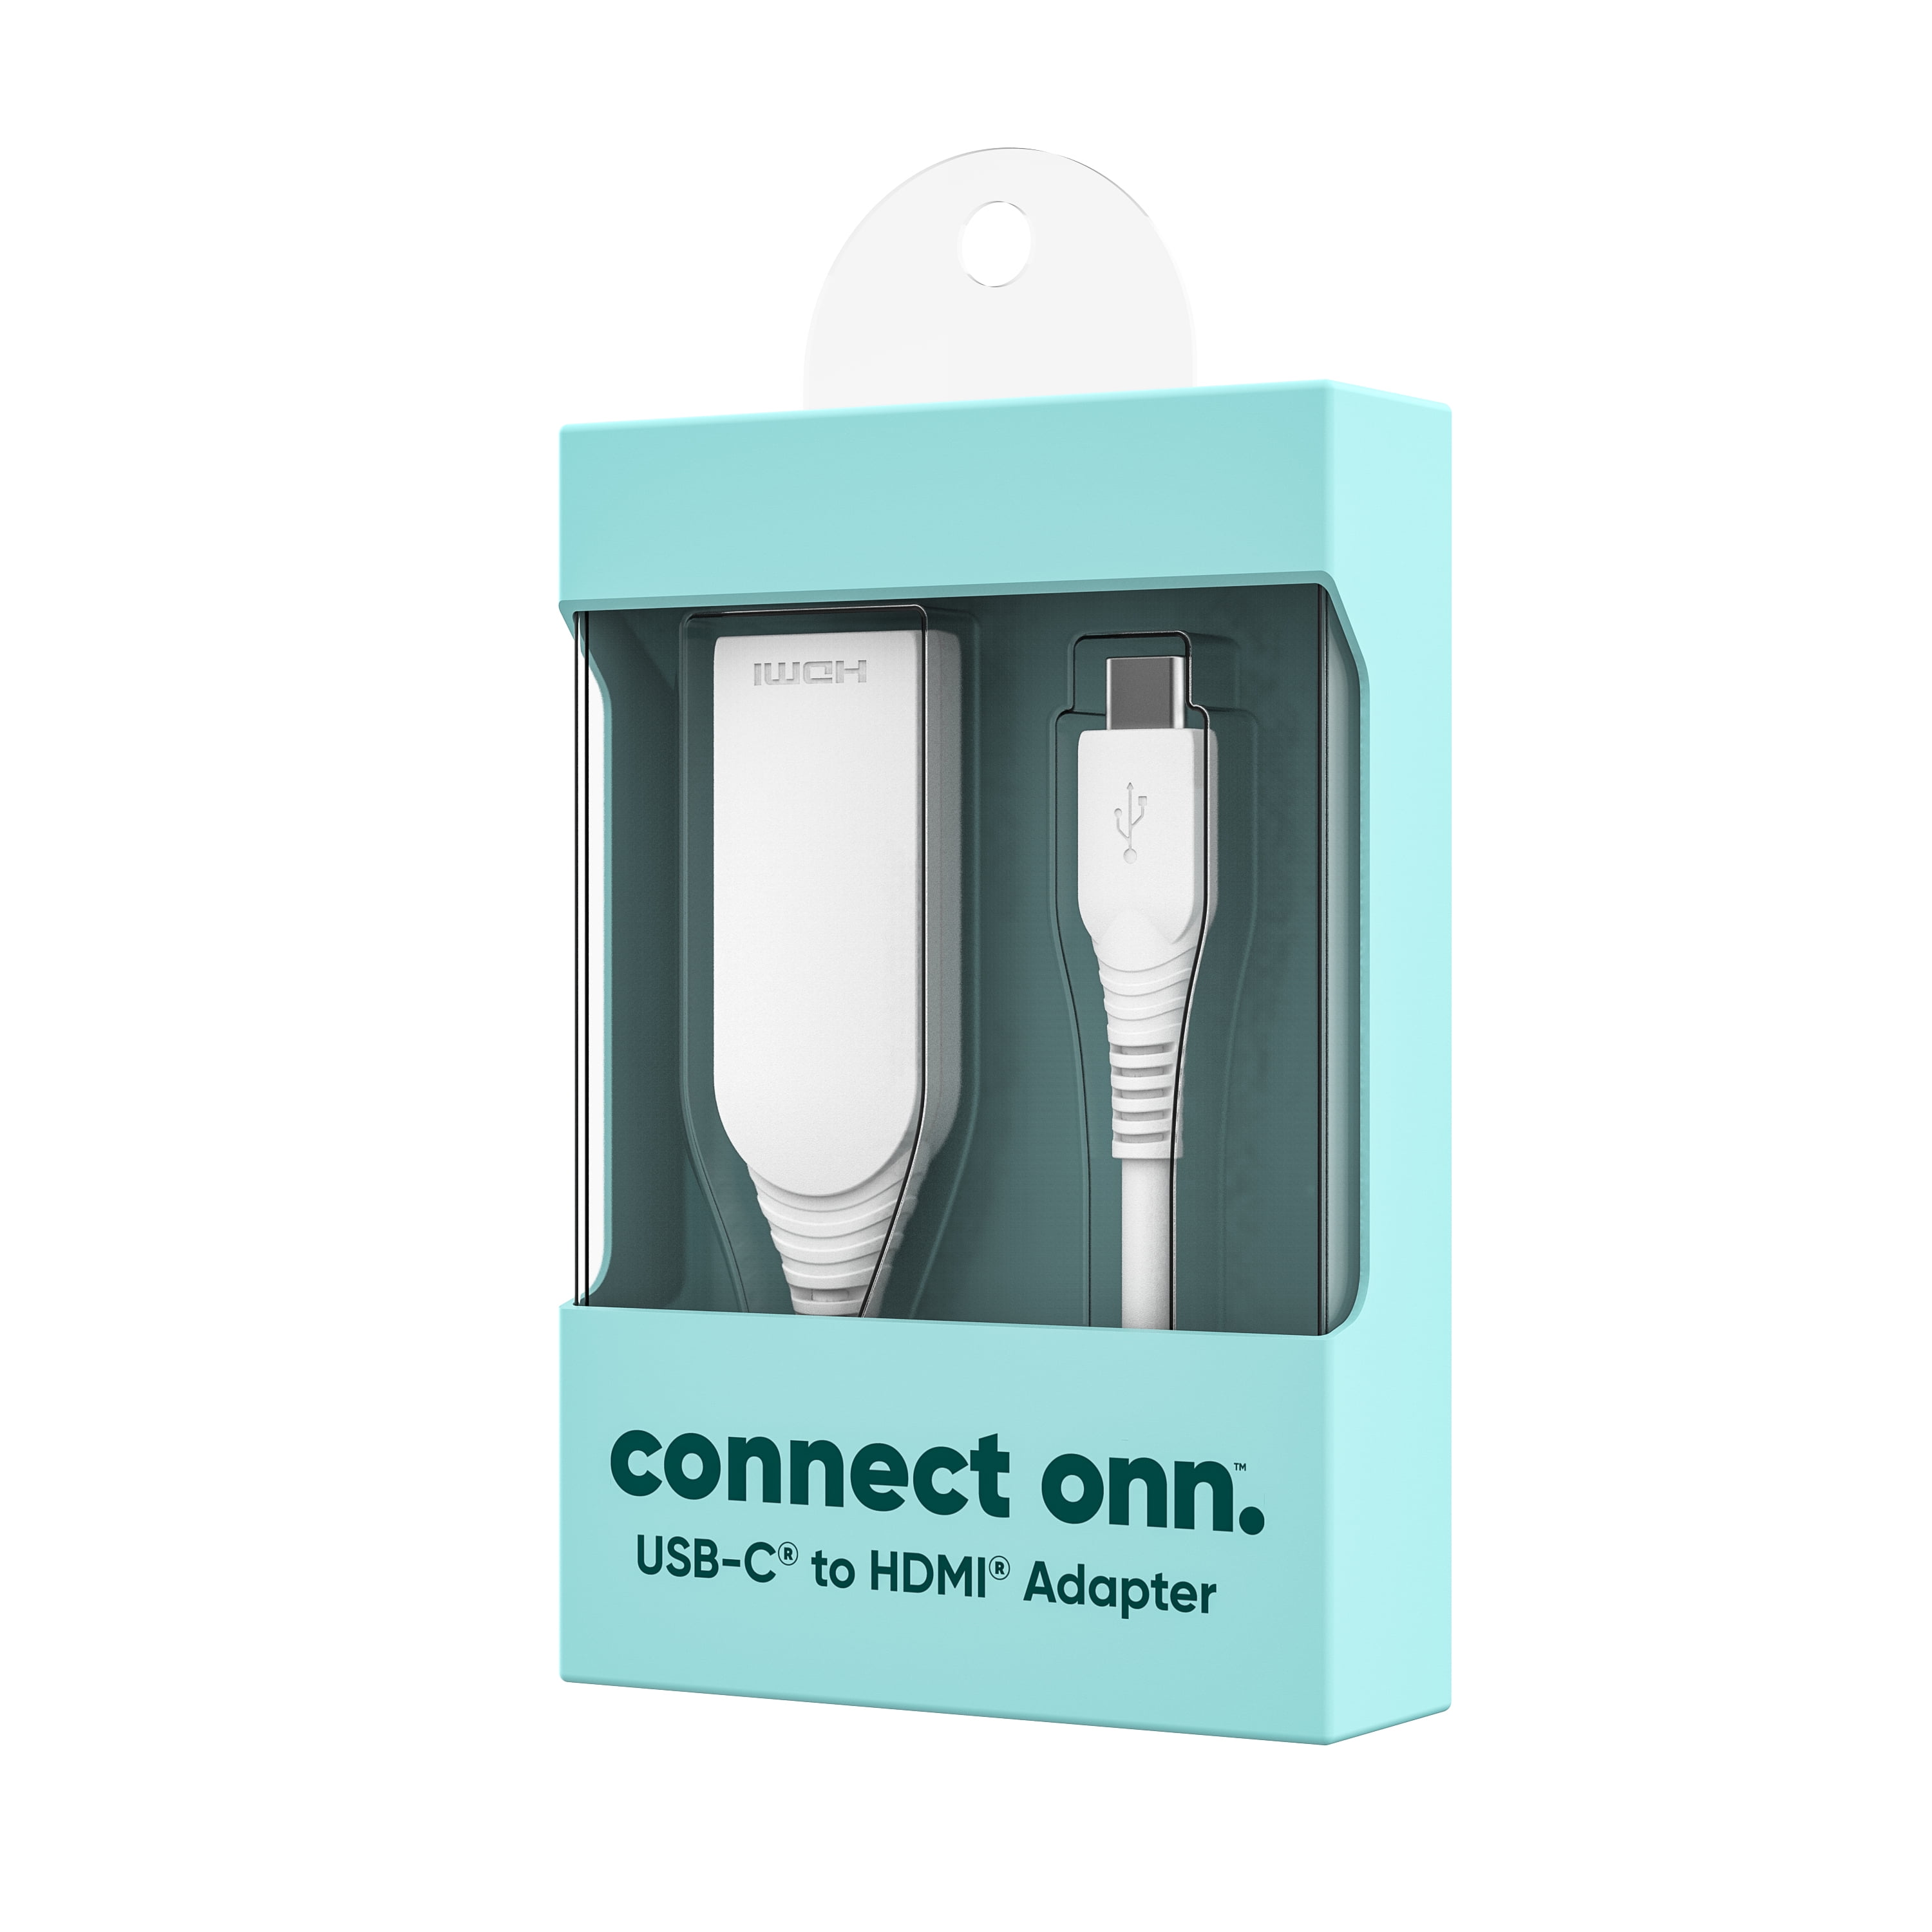 onn. 8-in-1 USB-C Adapter, USB 3.0 and 4K HDMI Compatible 